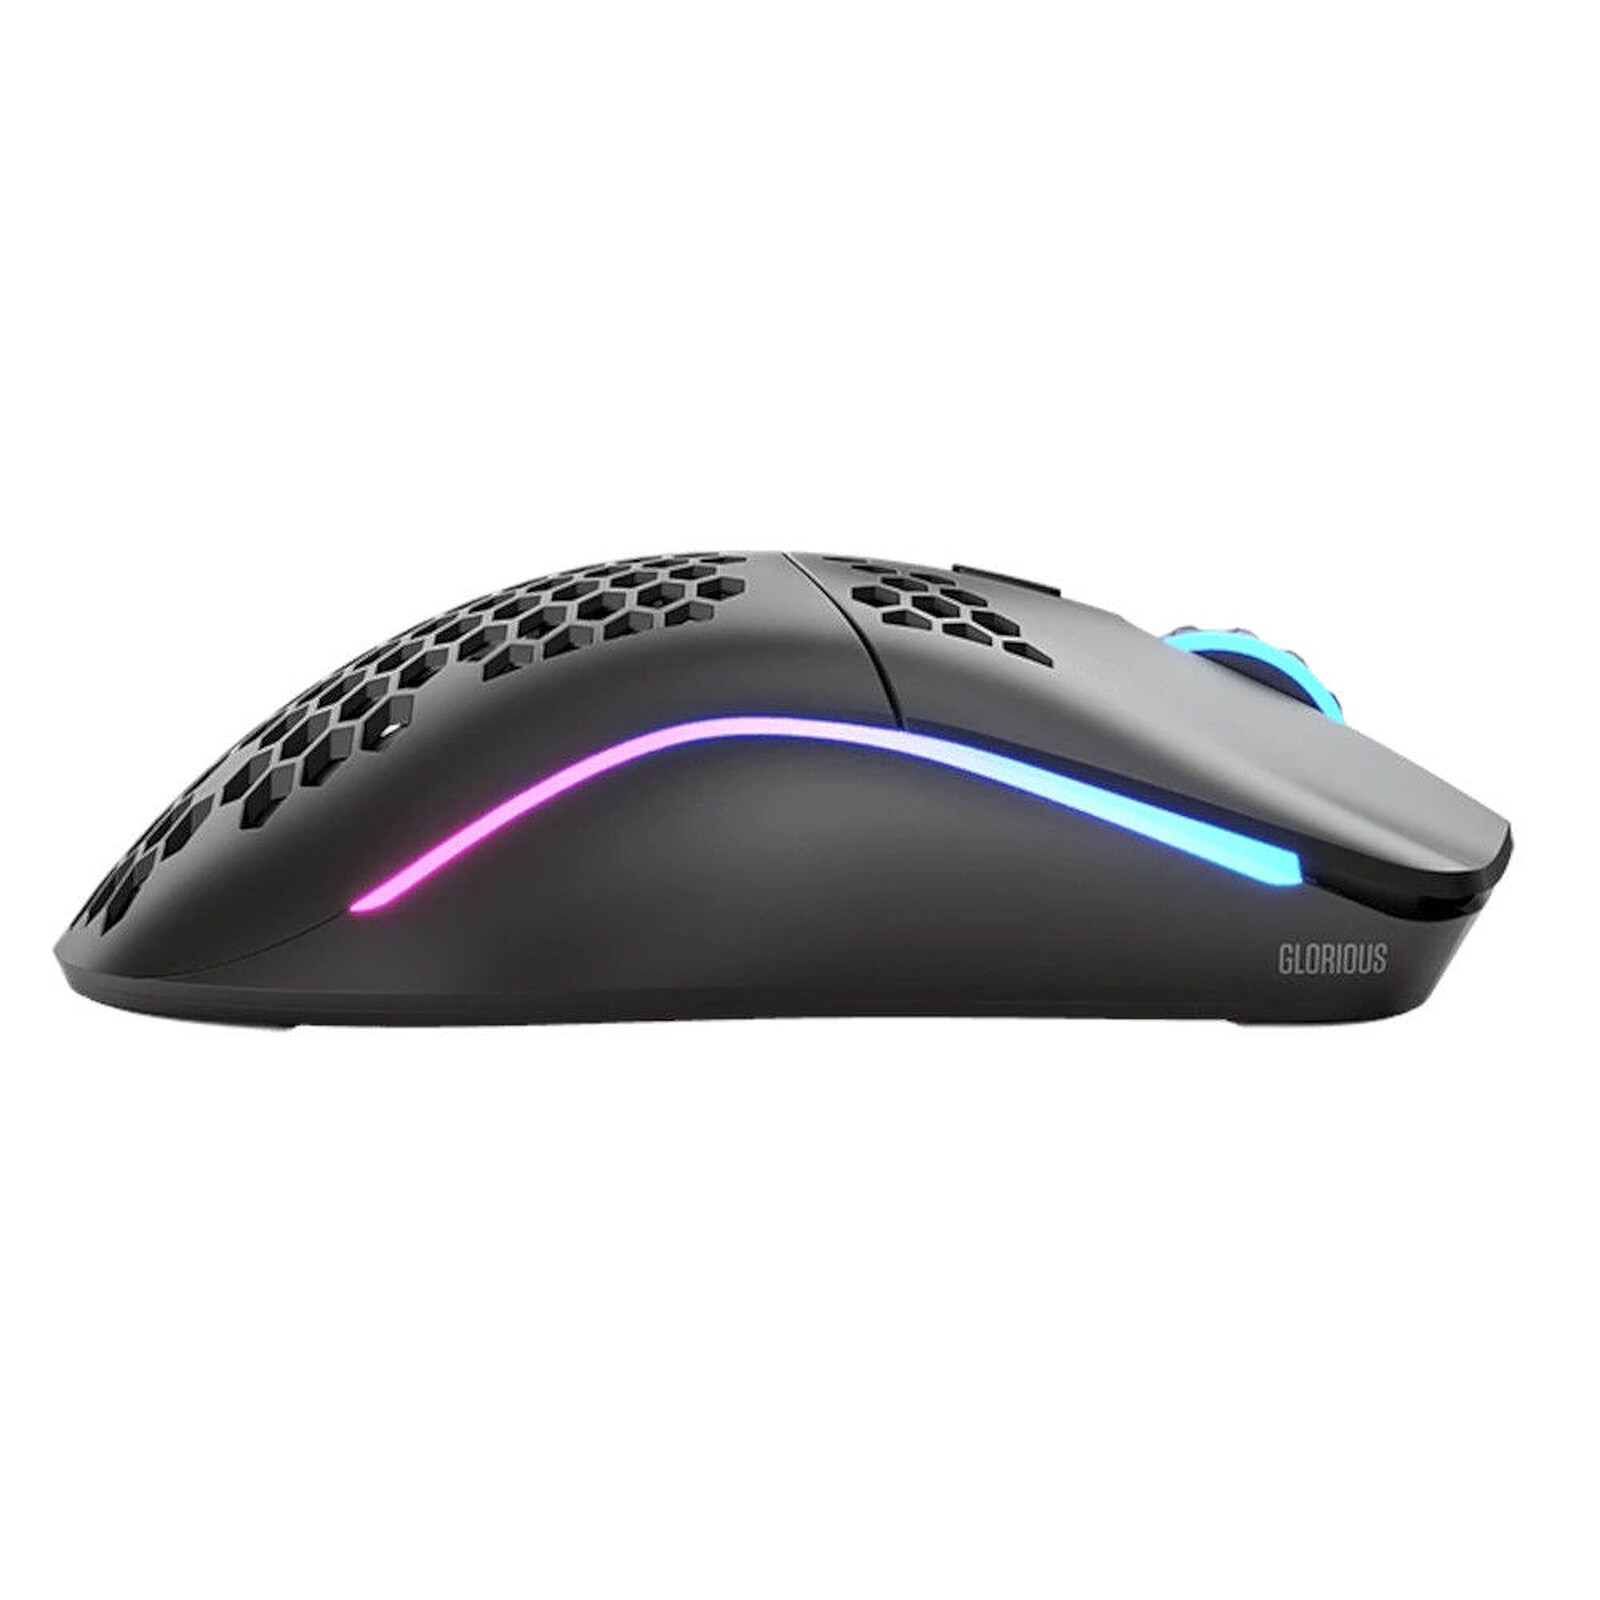 Glorious Model O Wireless Black Mouse Glorious Pc Gaming Race On Ldlc